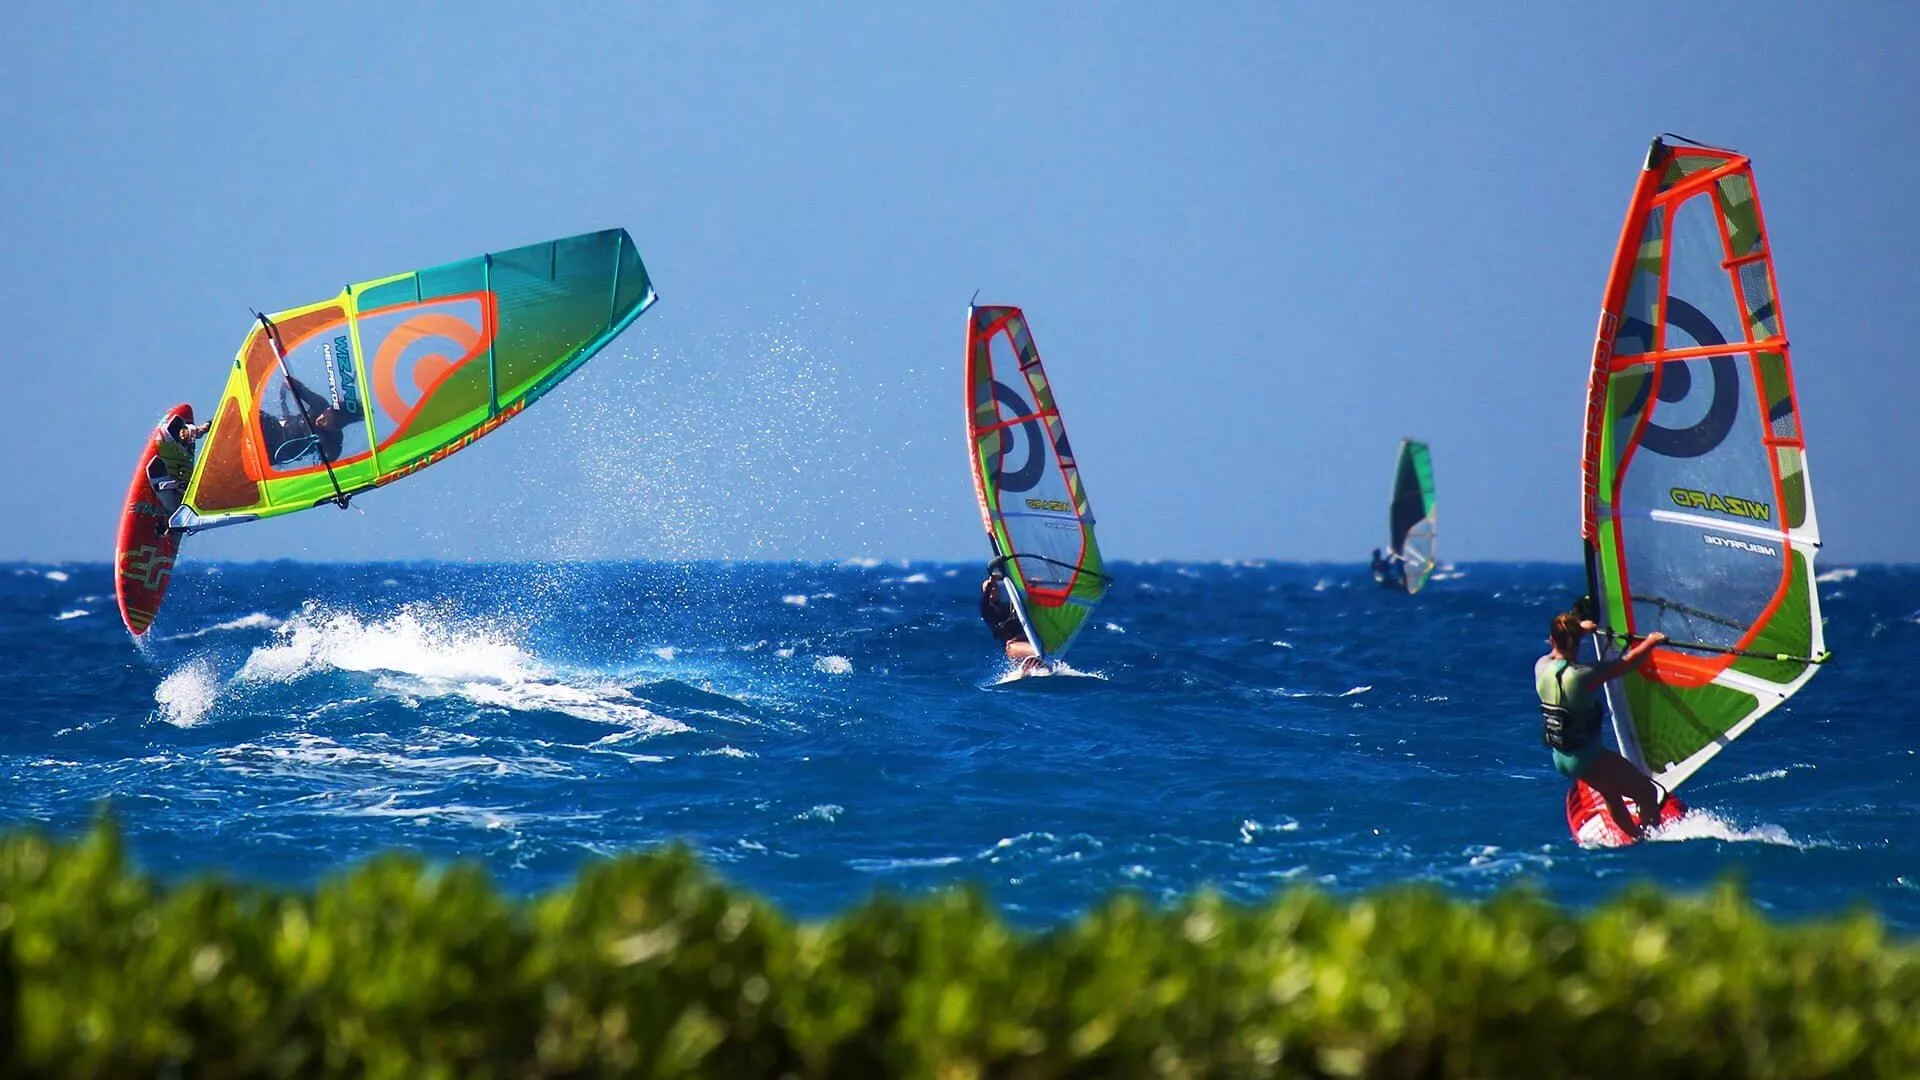 Club Tribunales in Argentina, South America | Windsurfing - Rated 9.5